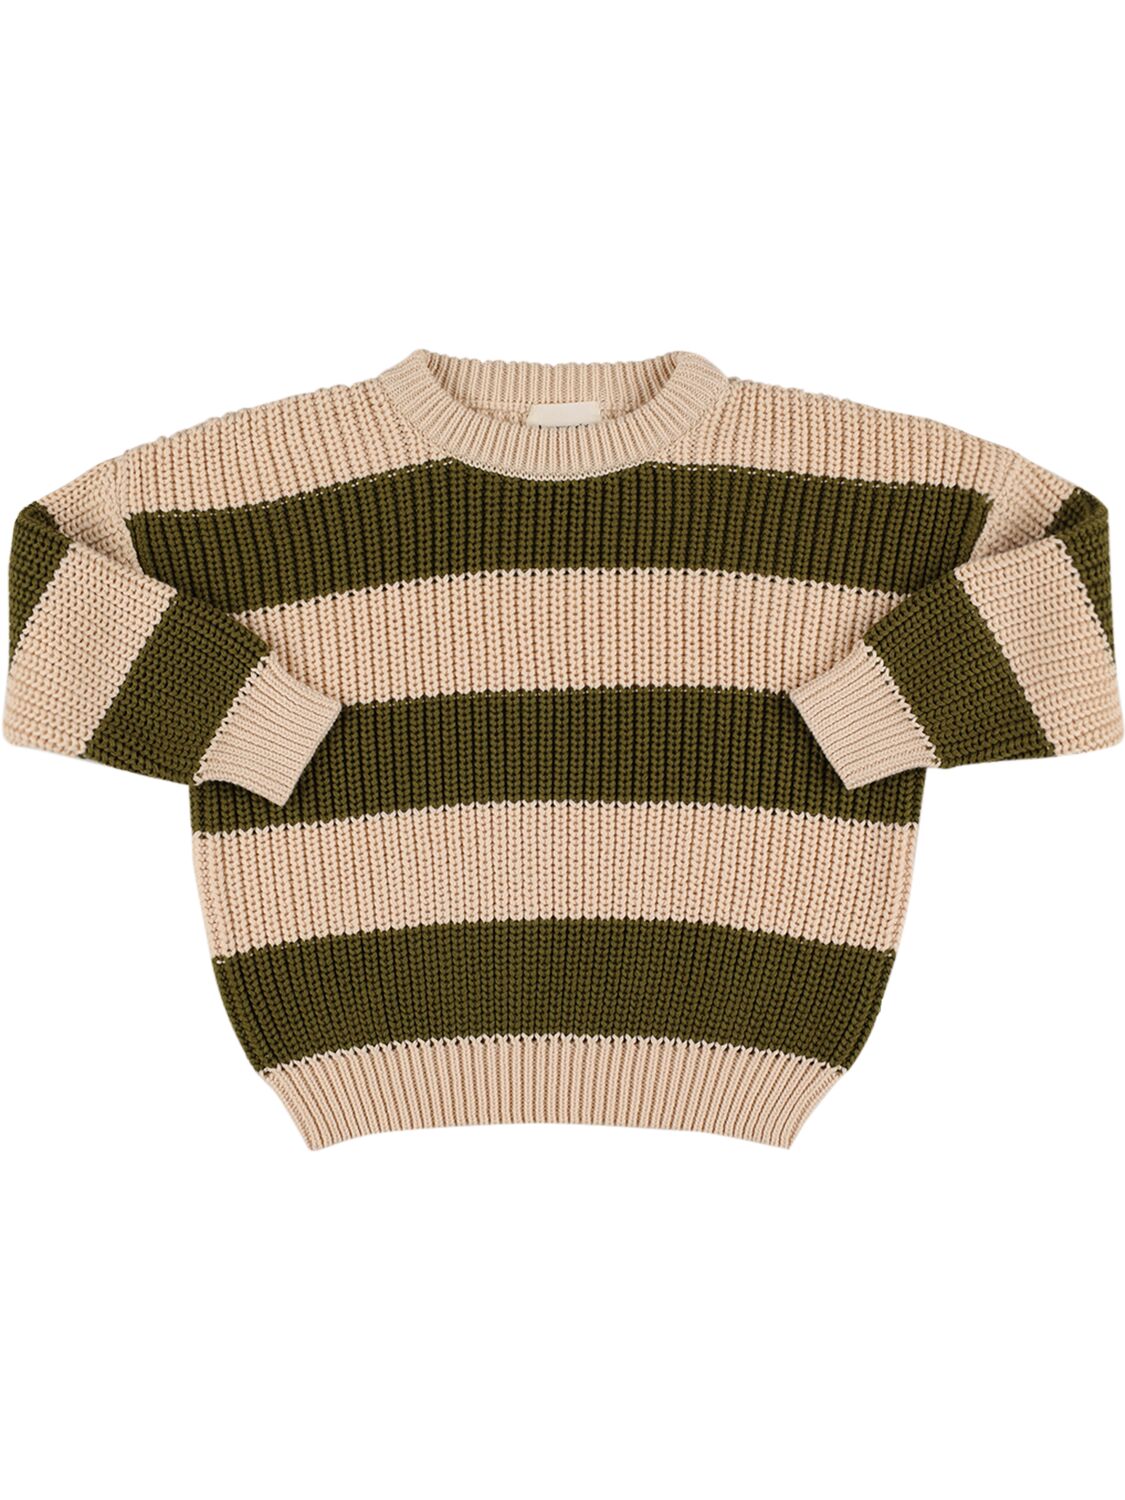 The New Society Kids' Organic Cotton Knit Sweater In Beige